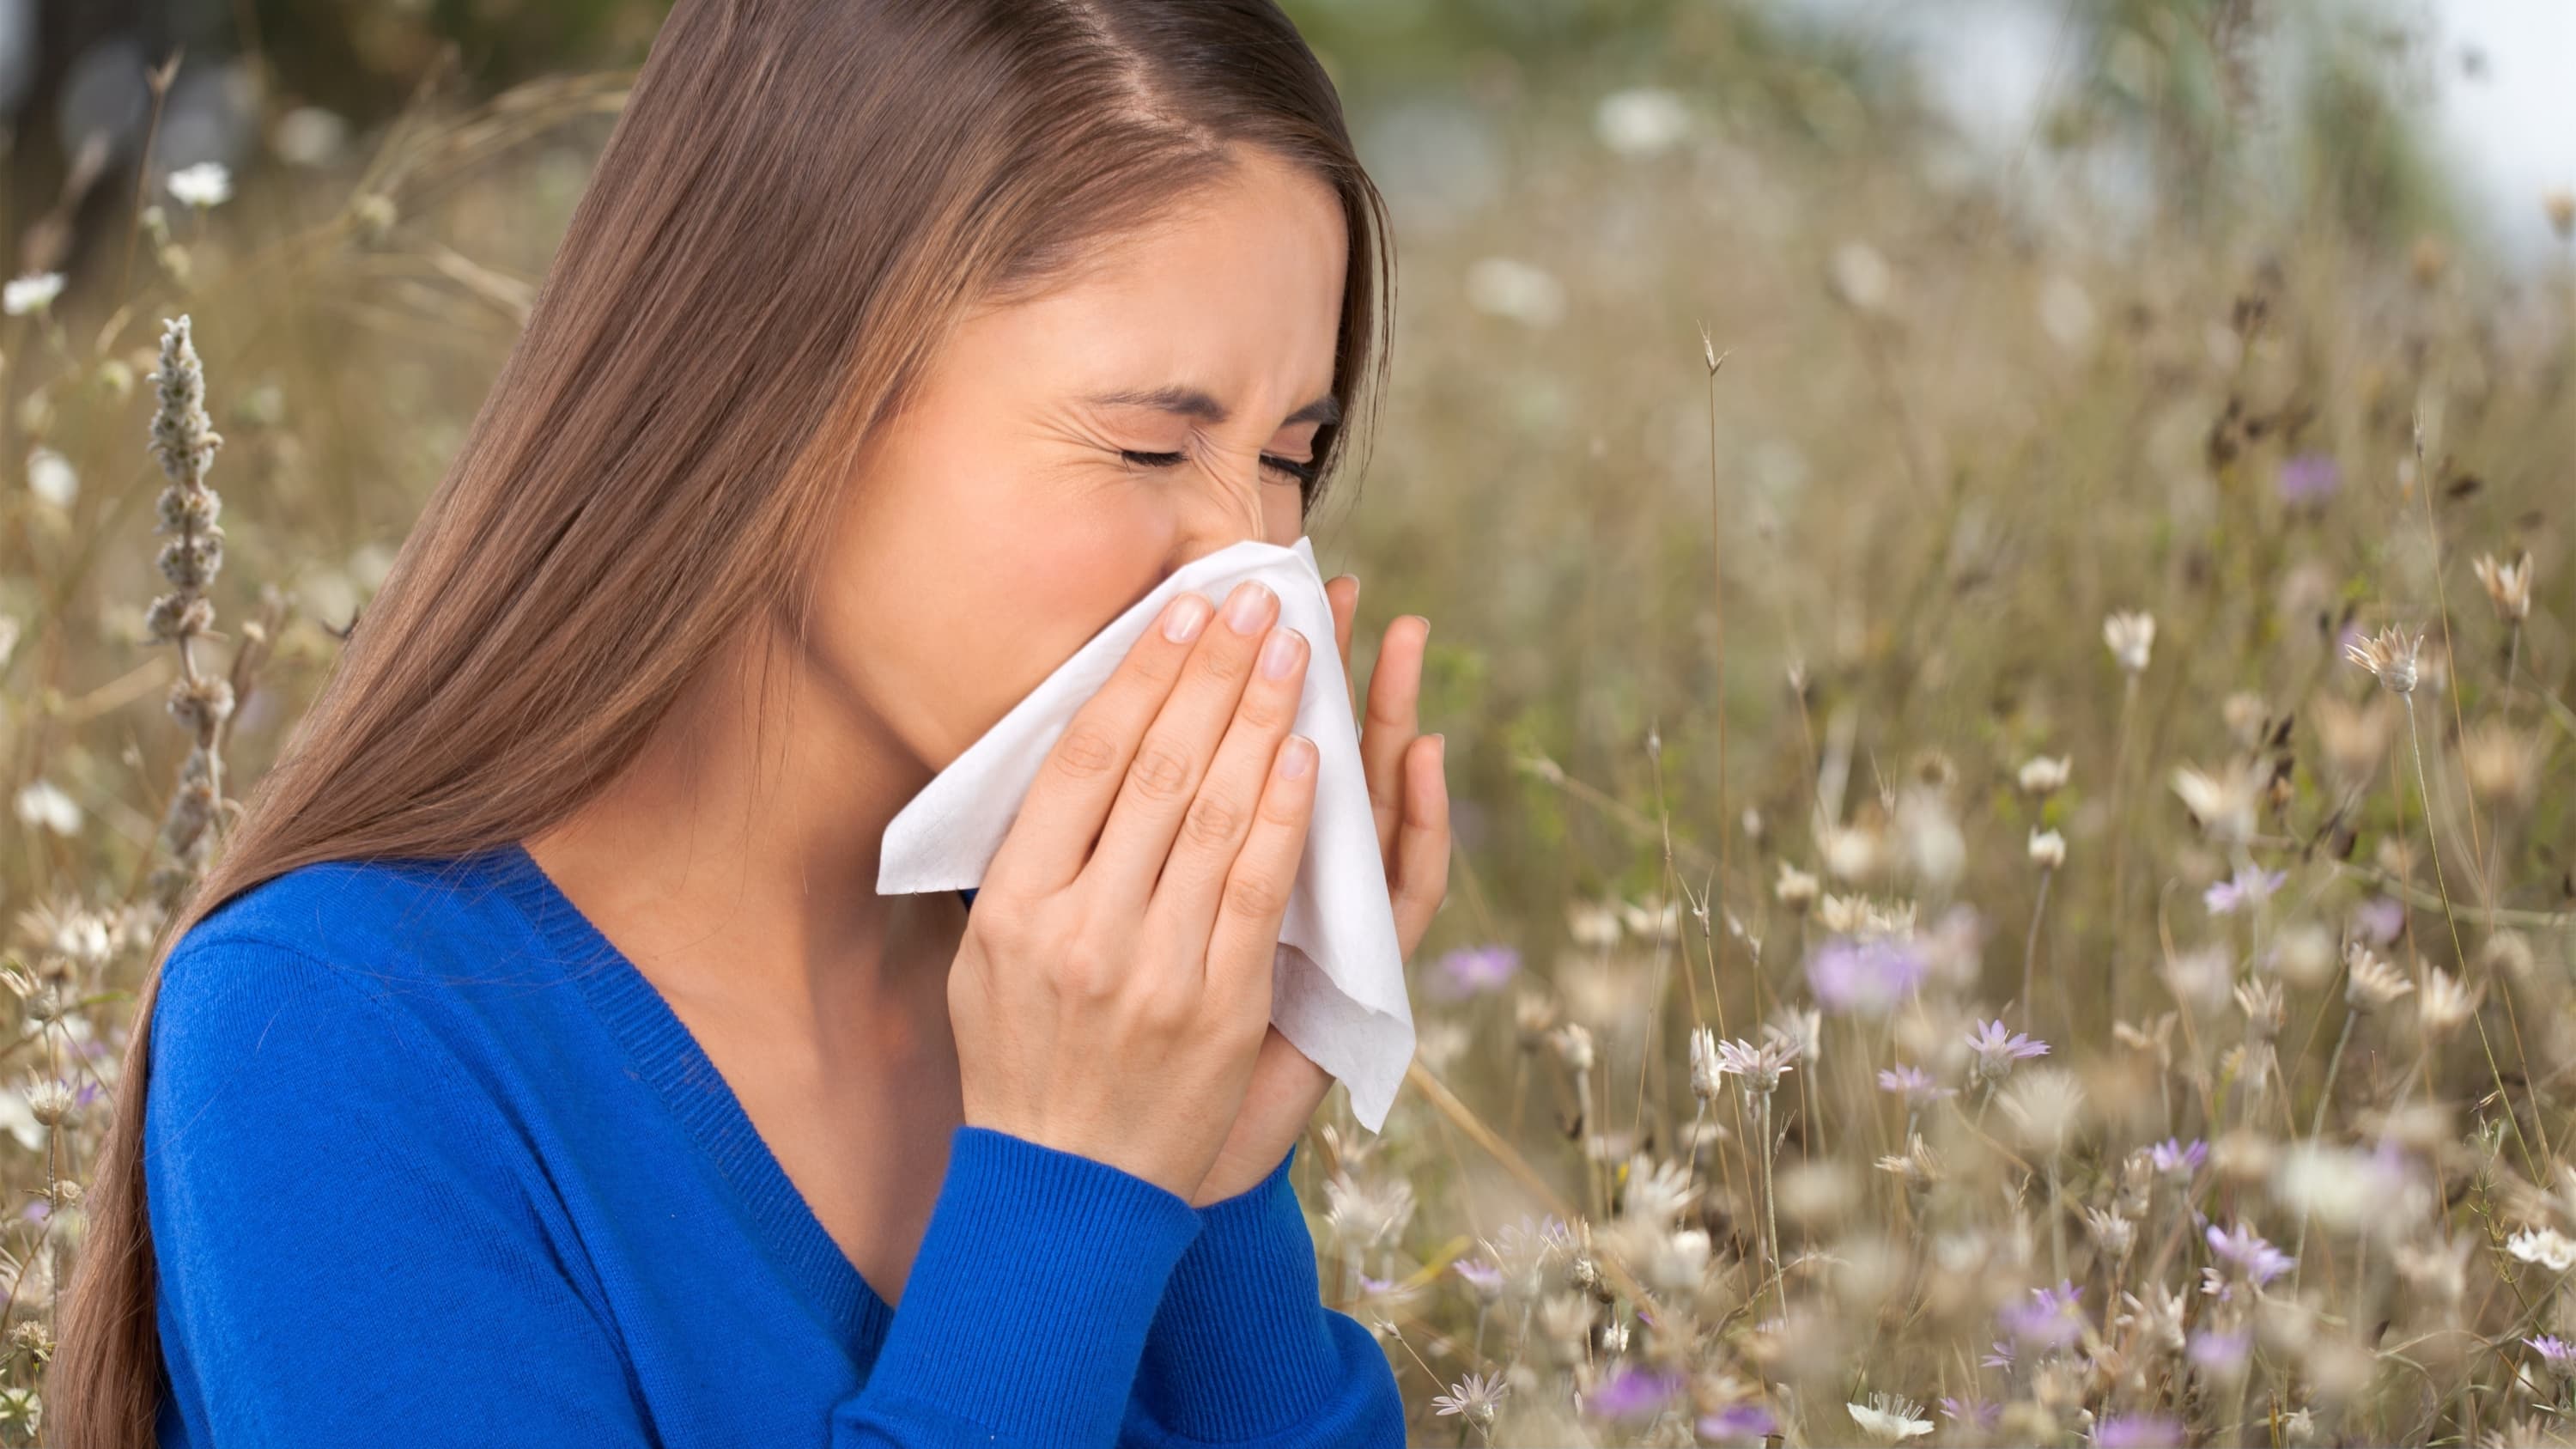 A woman in a blue shirt who has seasonal allergies sneezes into a tissue outside.